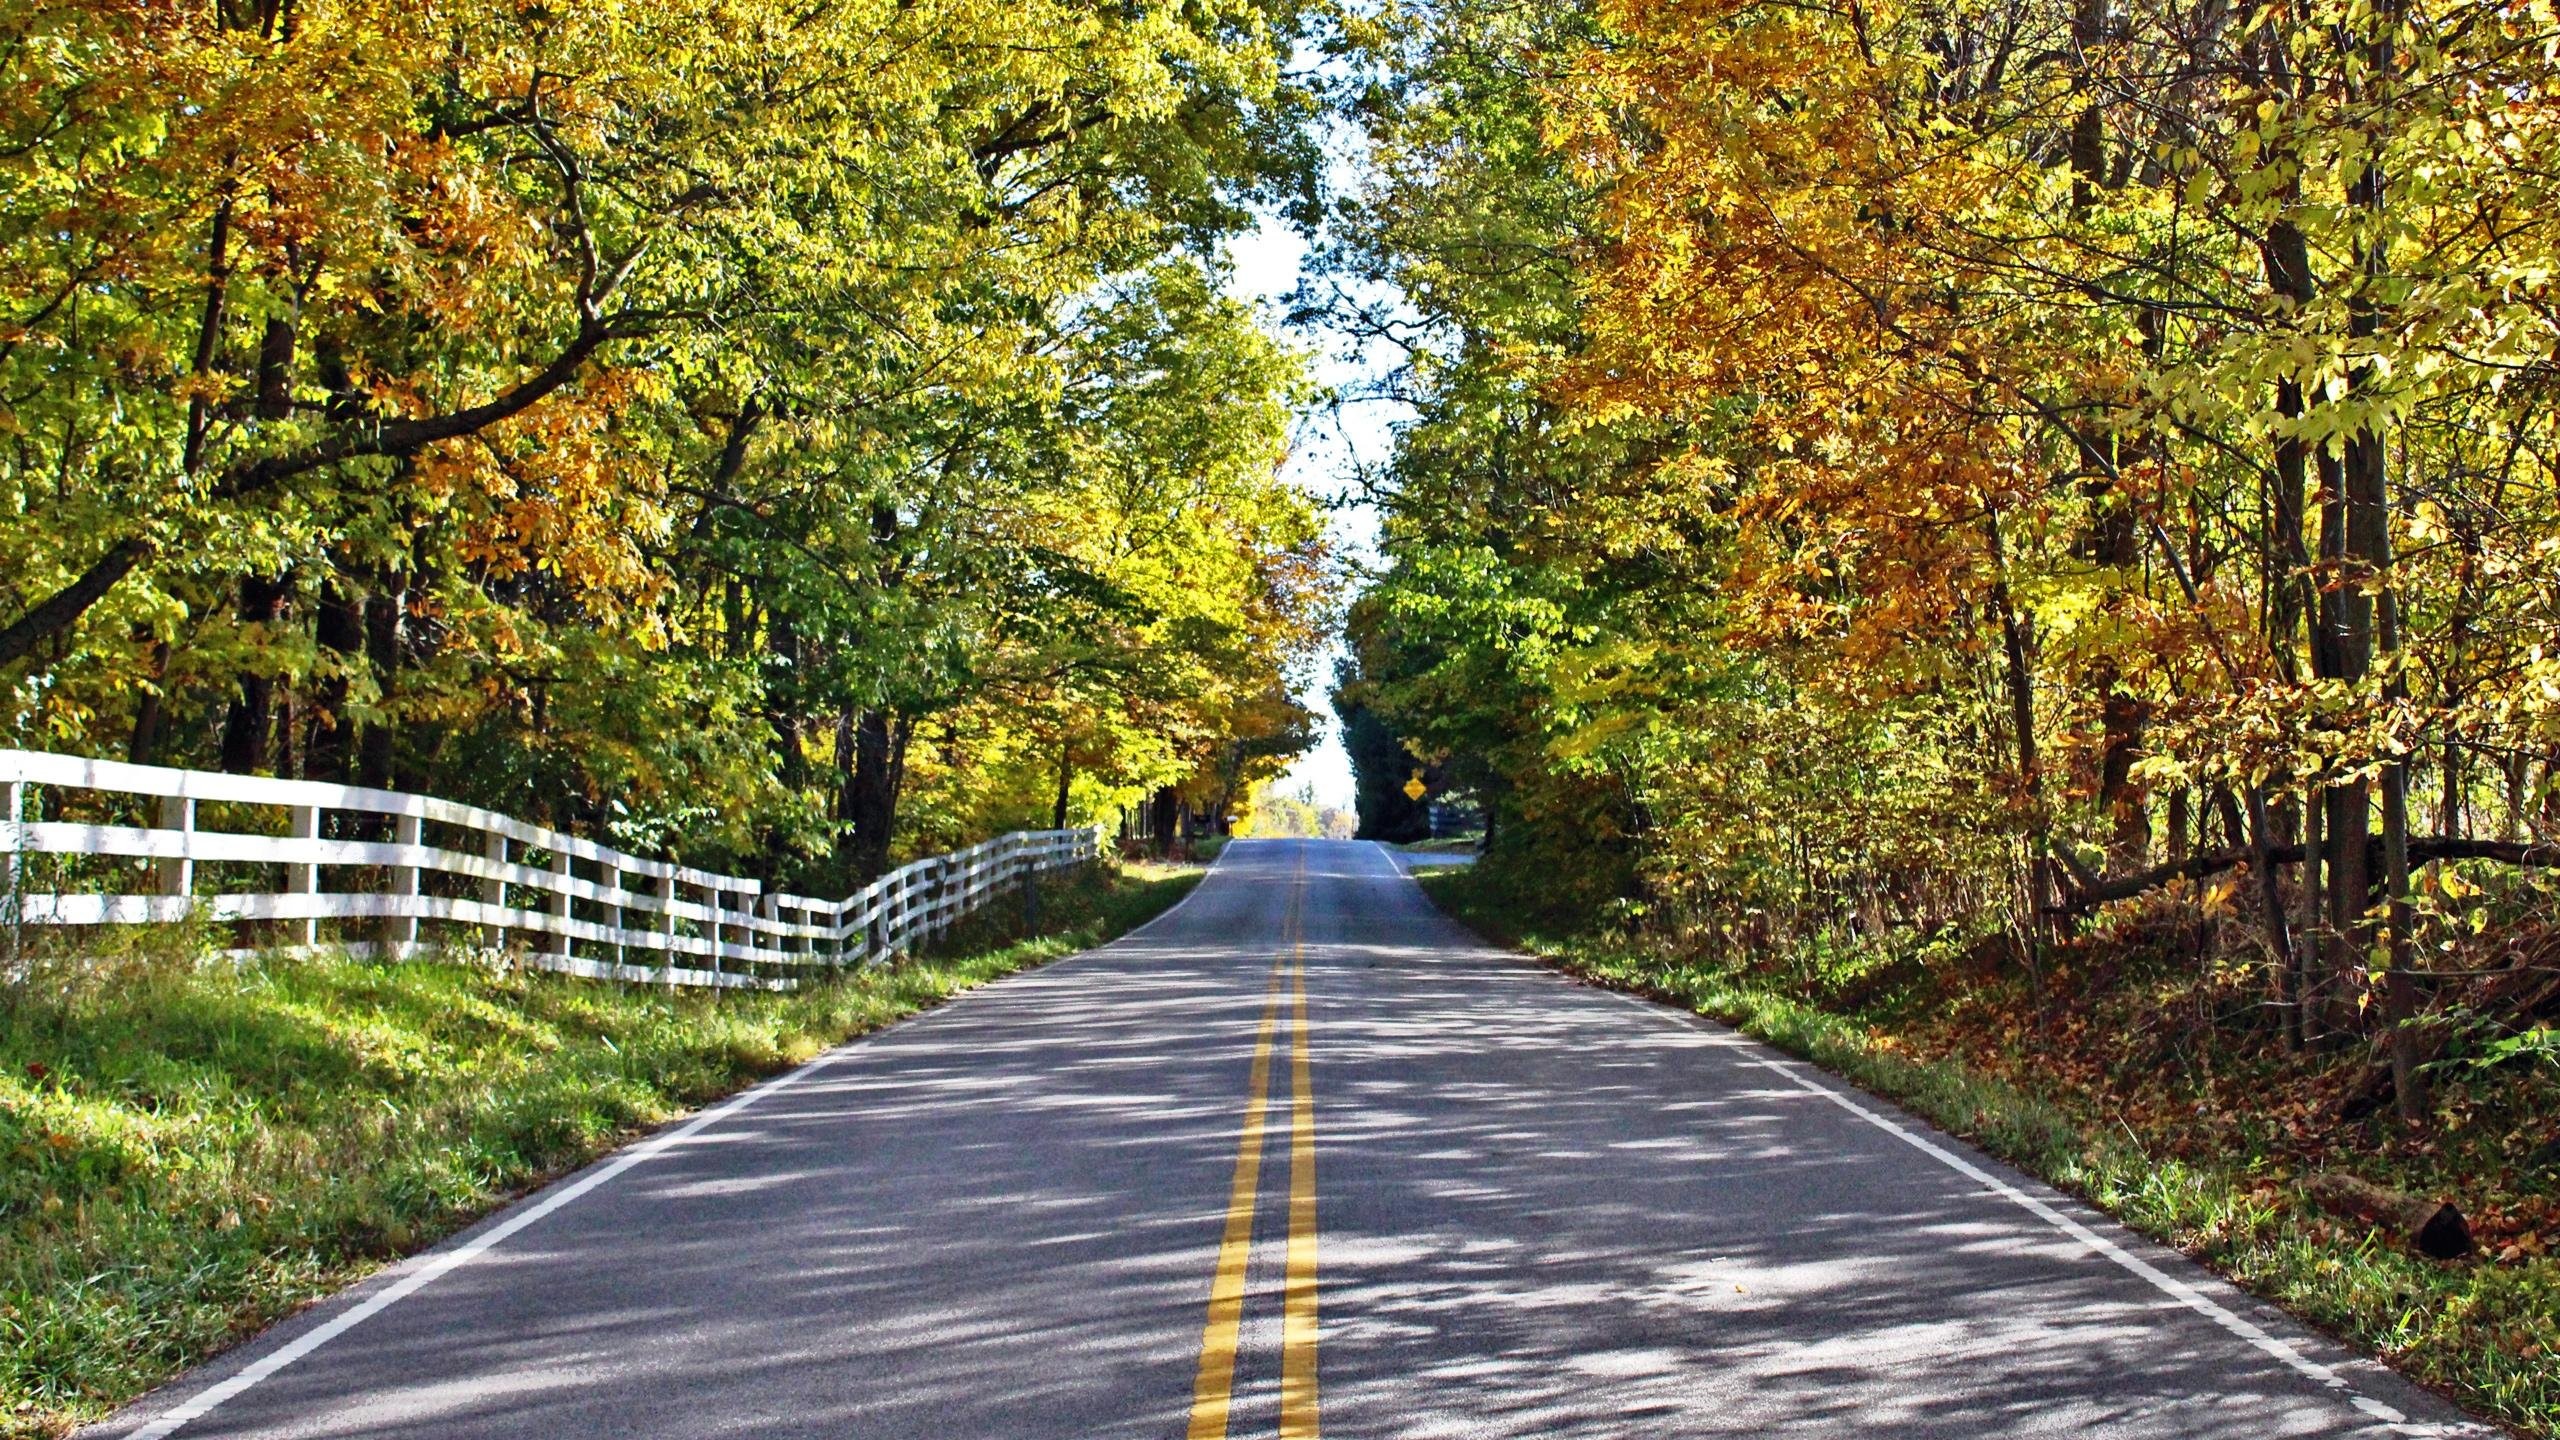 2560x1440 Indiana Autumn Country Road Background Images Desktop